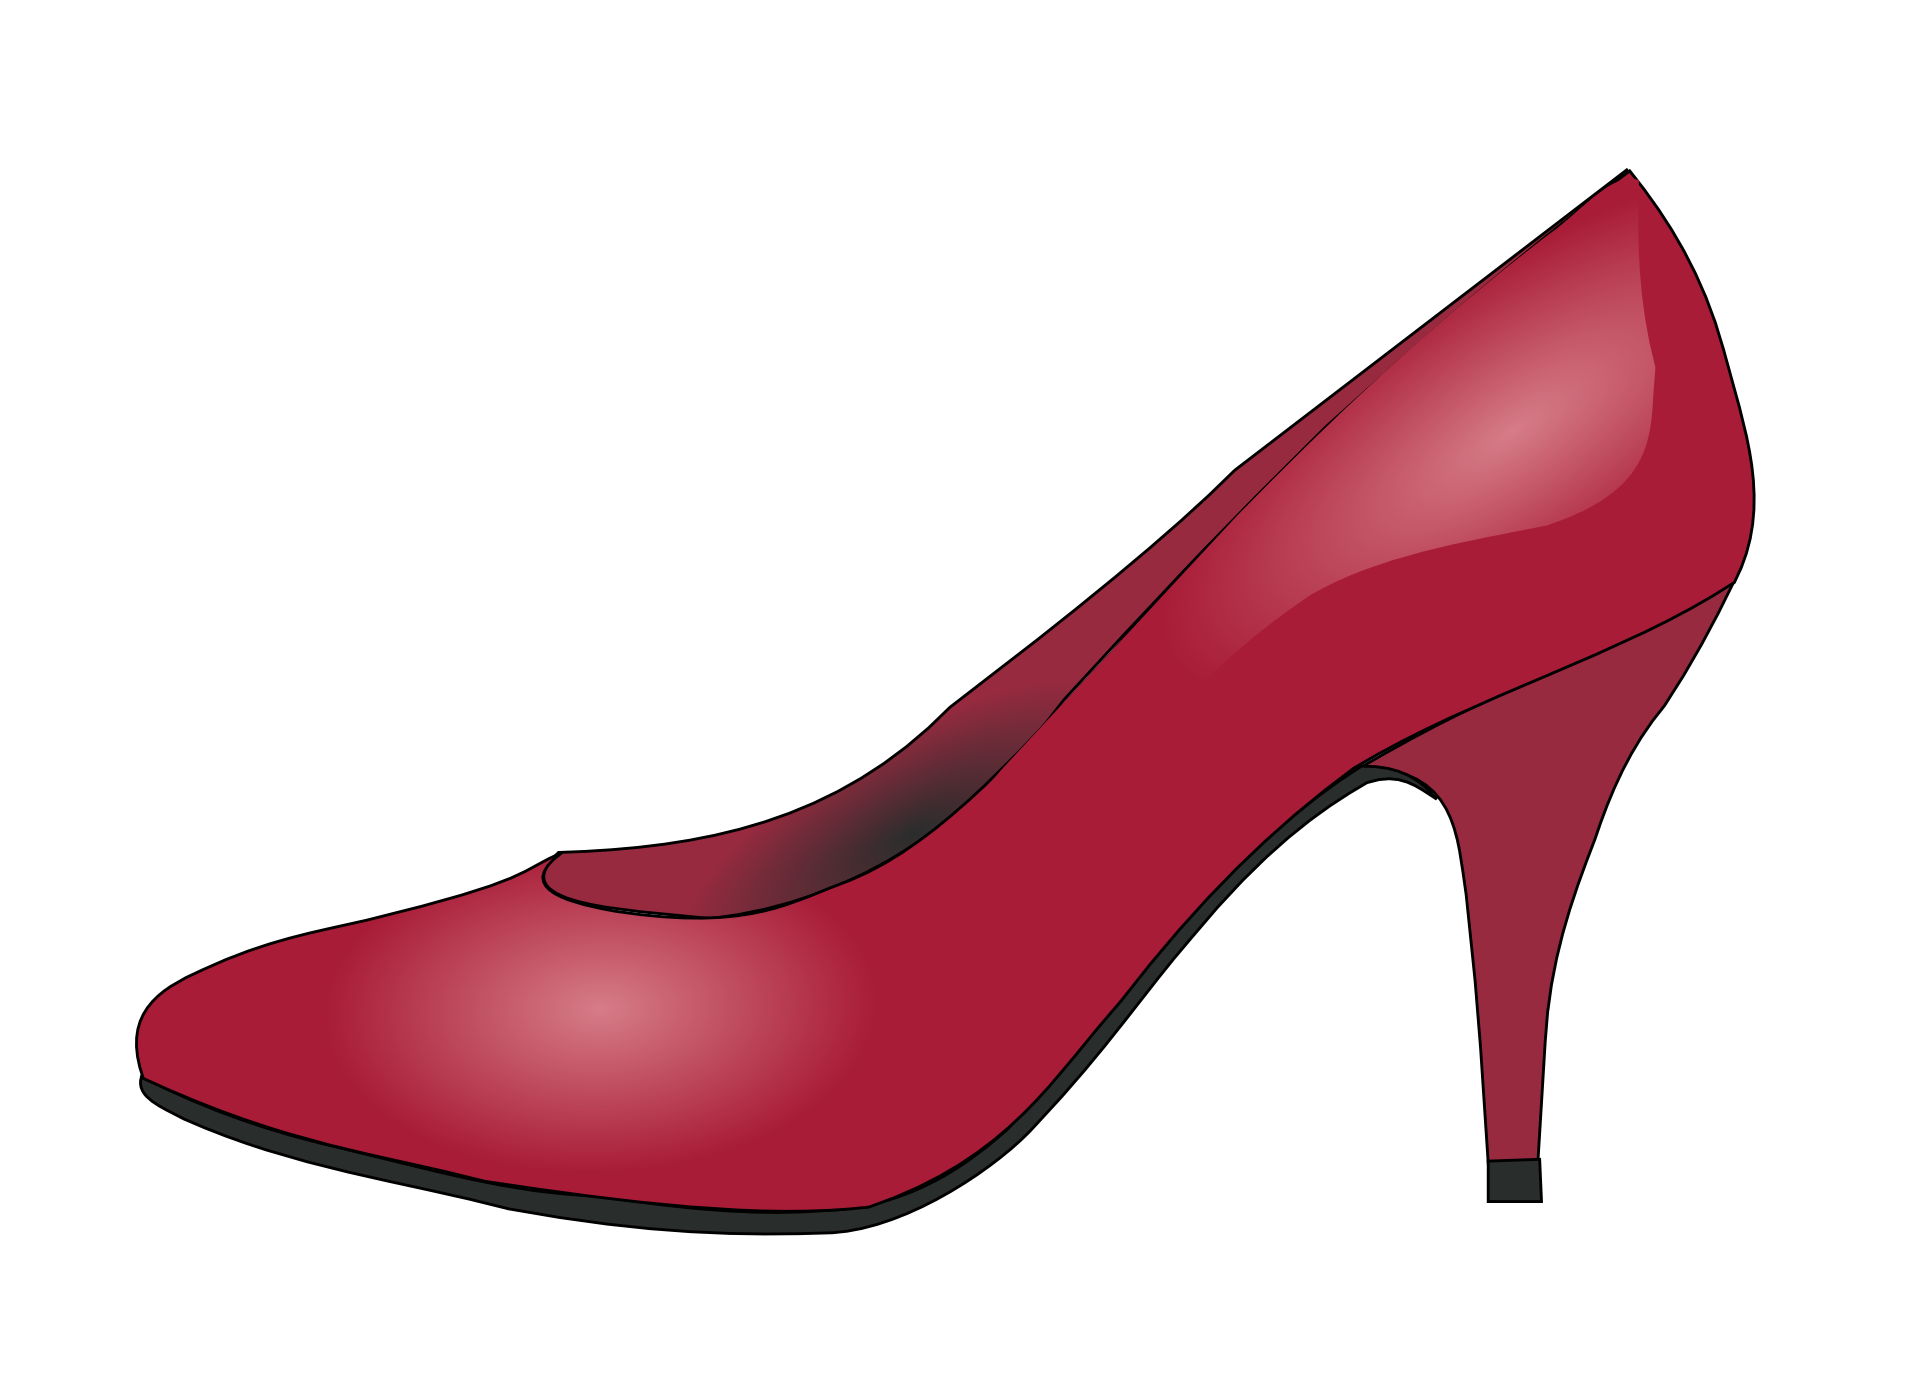 Classic red high heeled shoe, drawing at white background free image